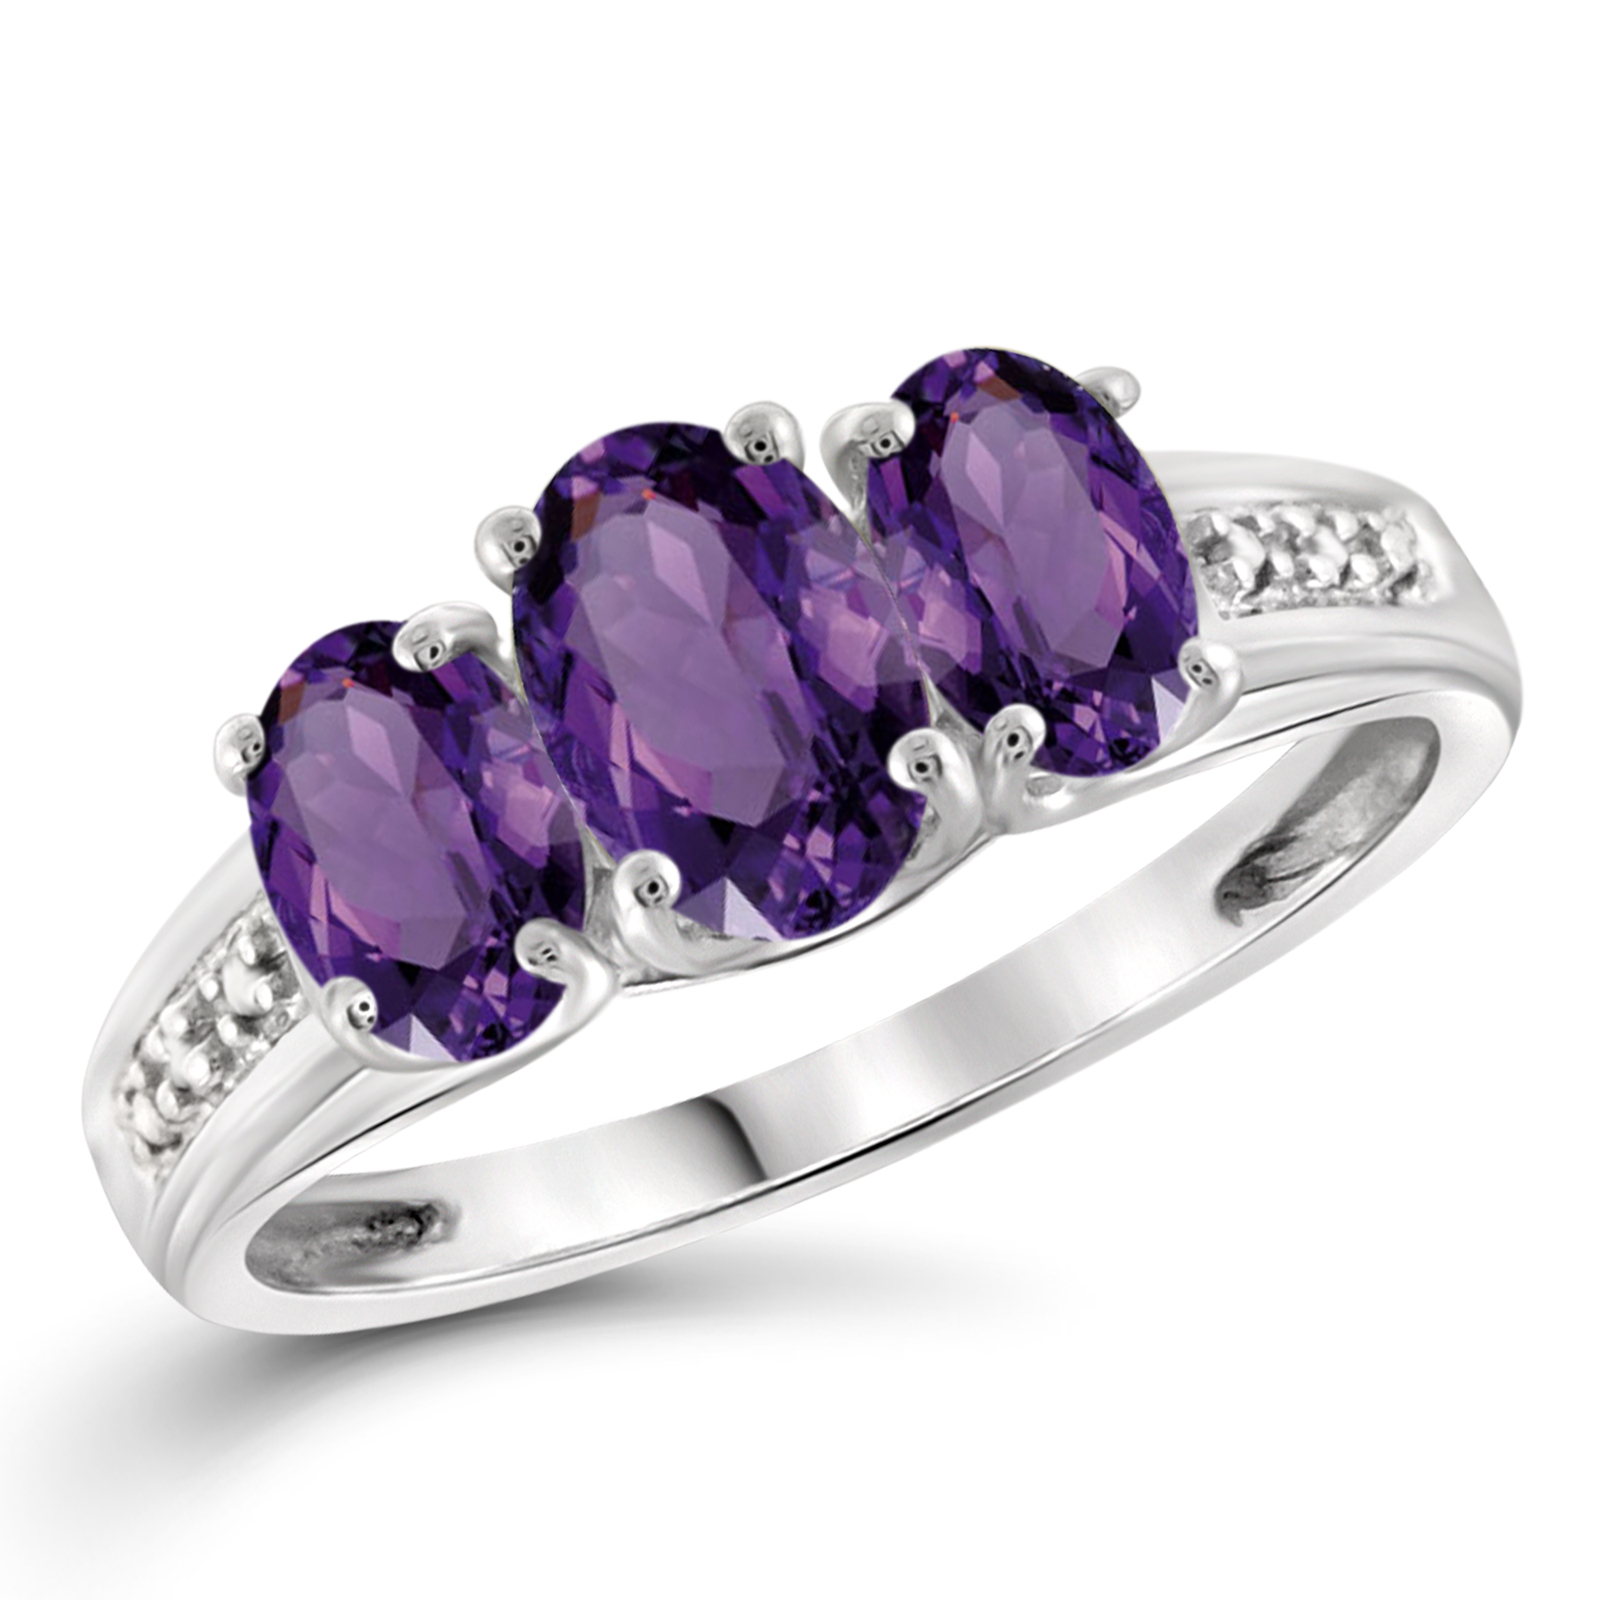 1.64 CTTW Genuine Amethyst Gemstone & Accent White Diamond Ring In Sterling Silver